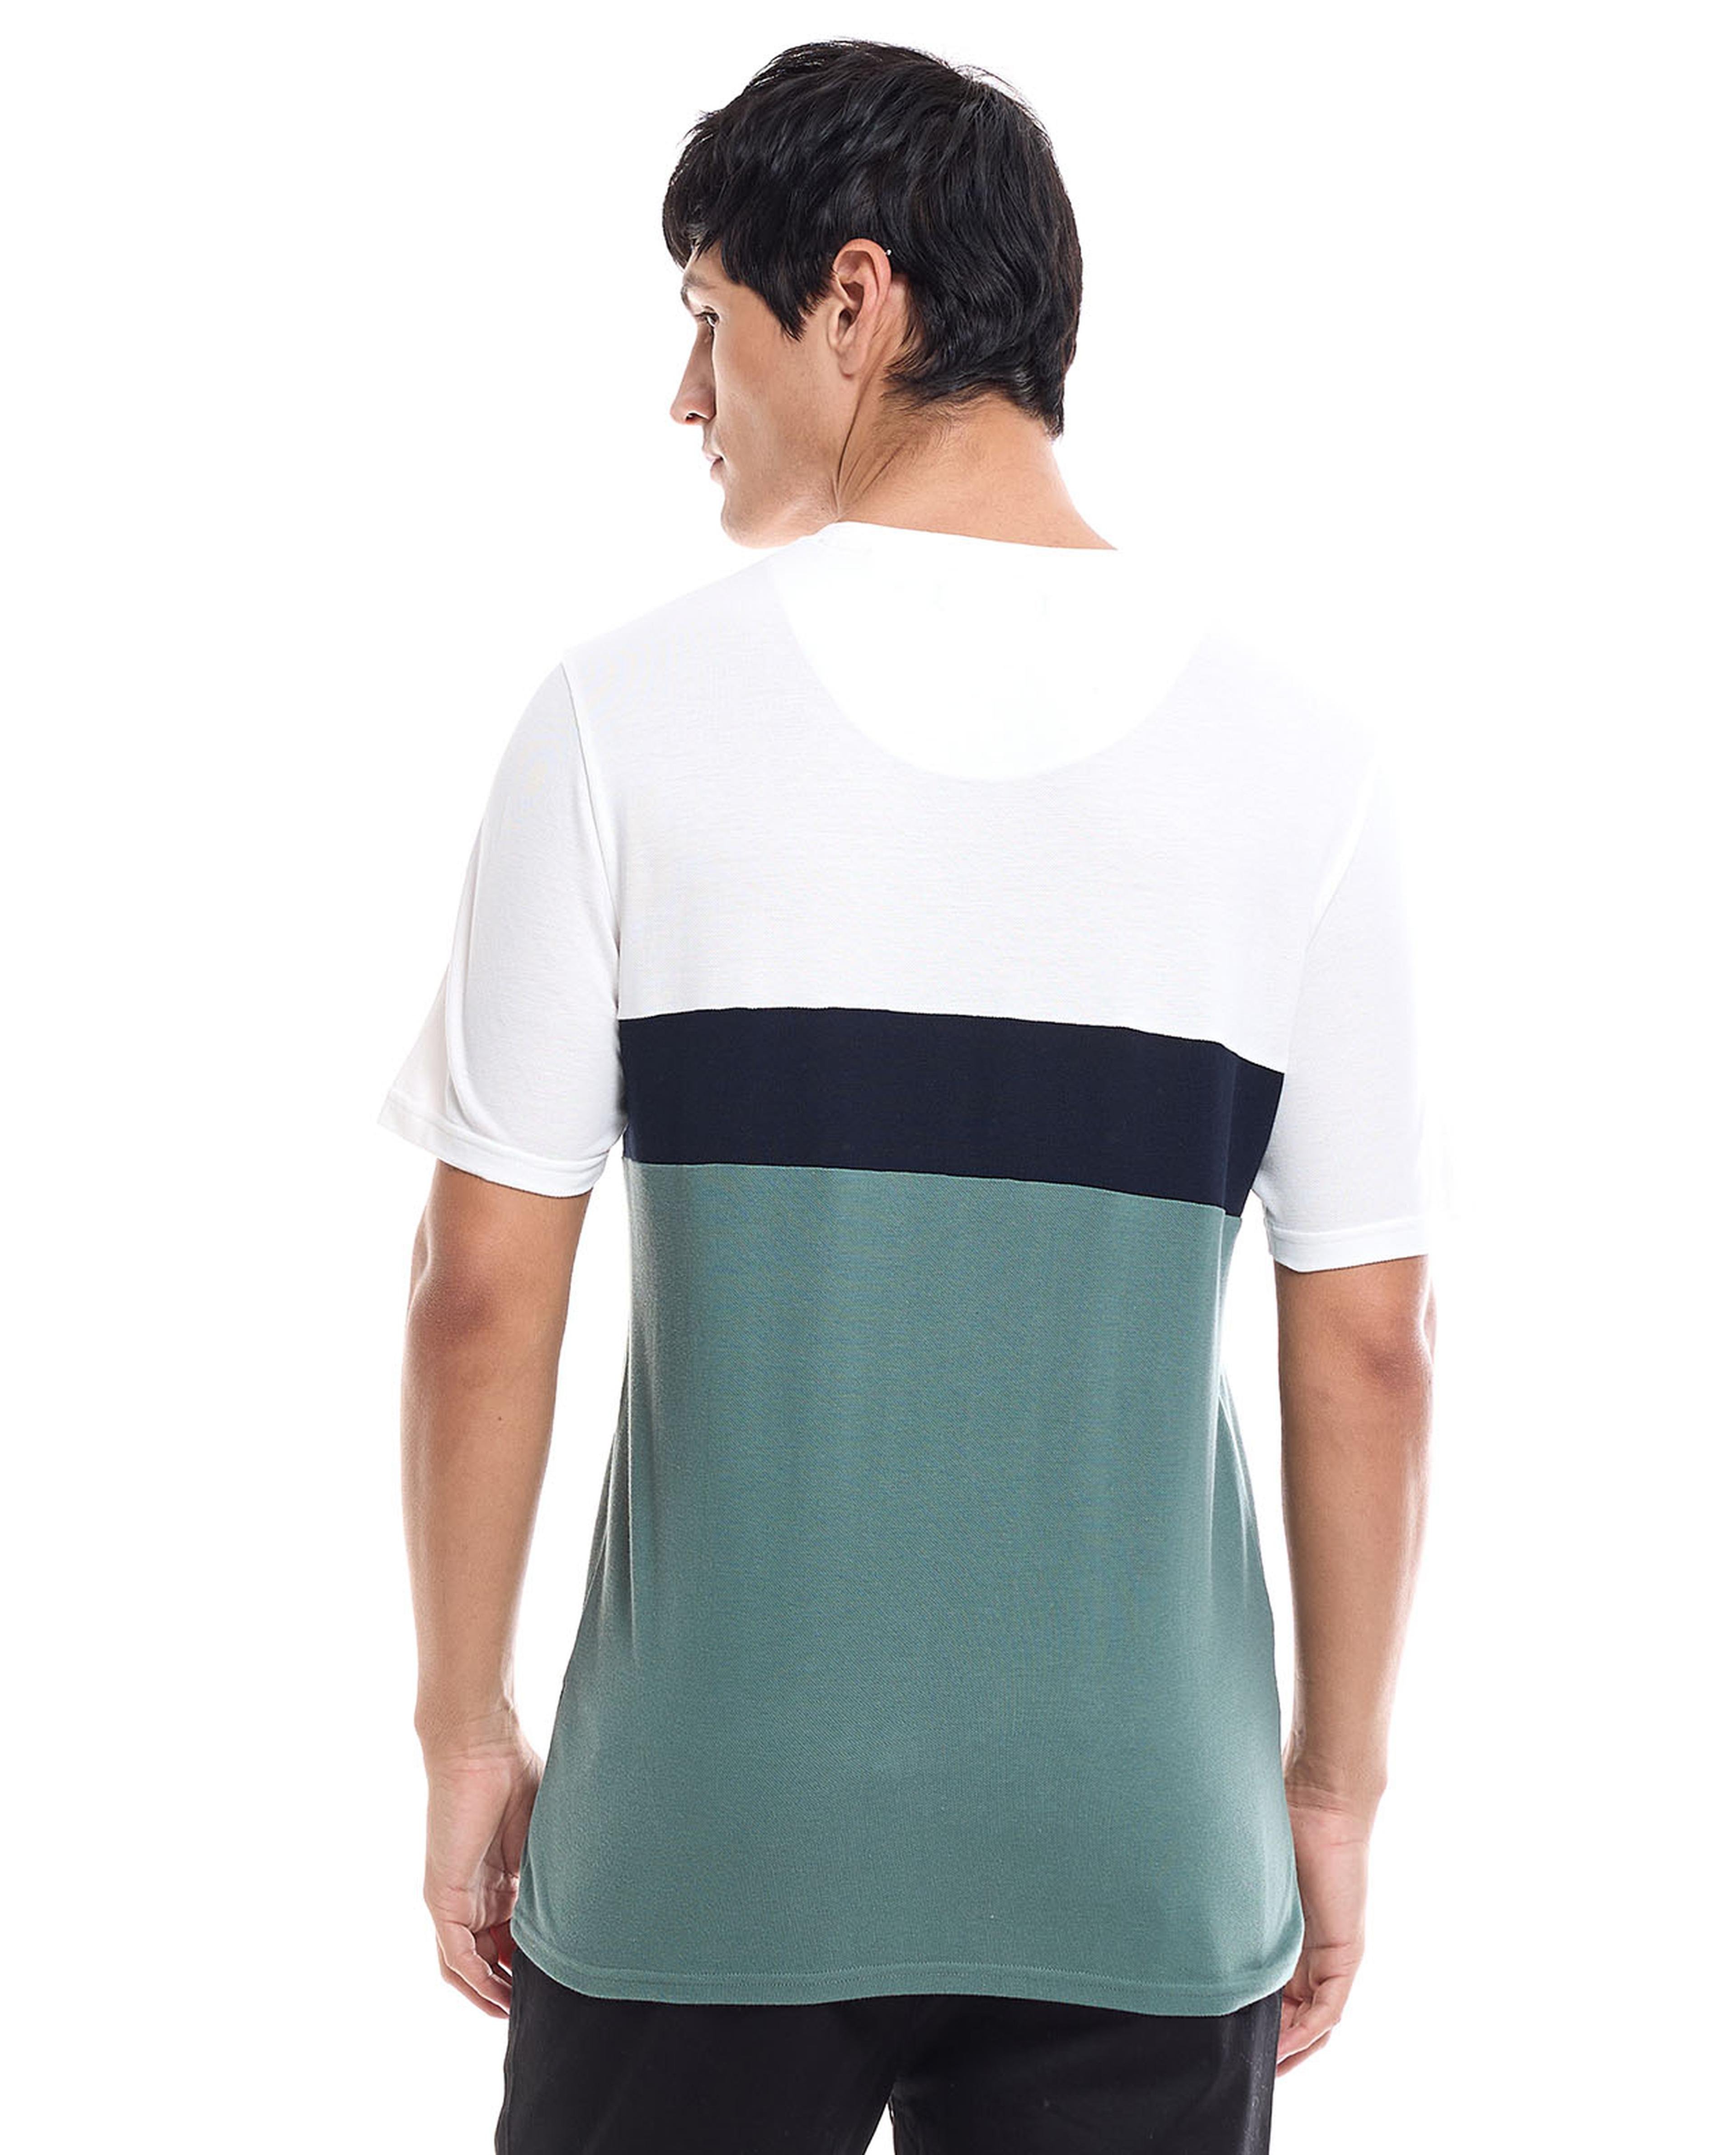 Color Block T-Shirt with Crew Neck and Short Sleeves